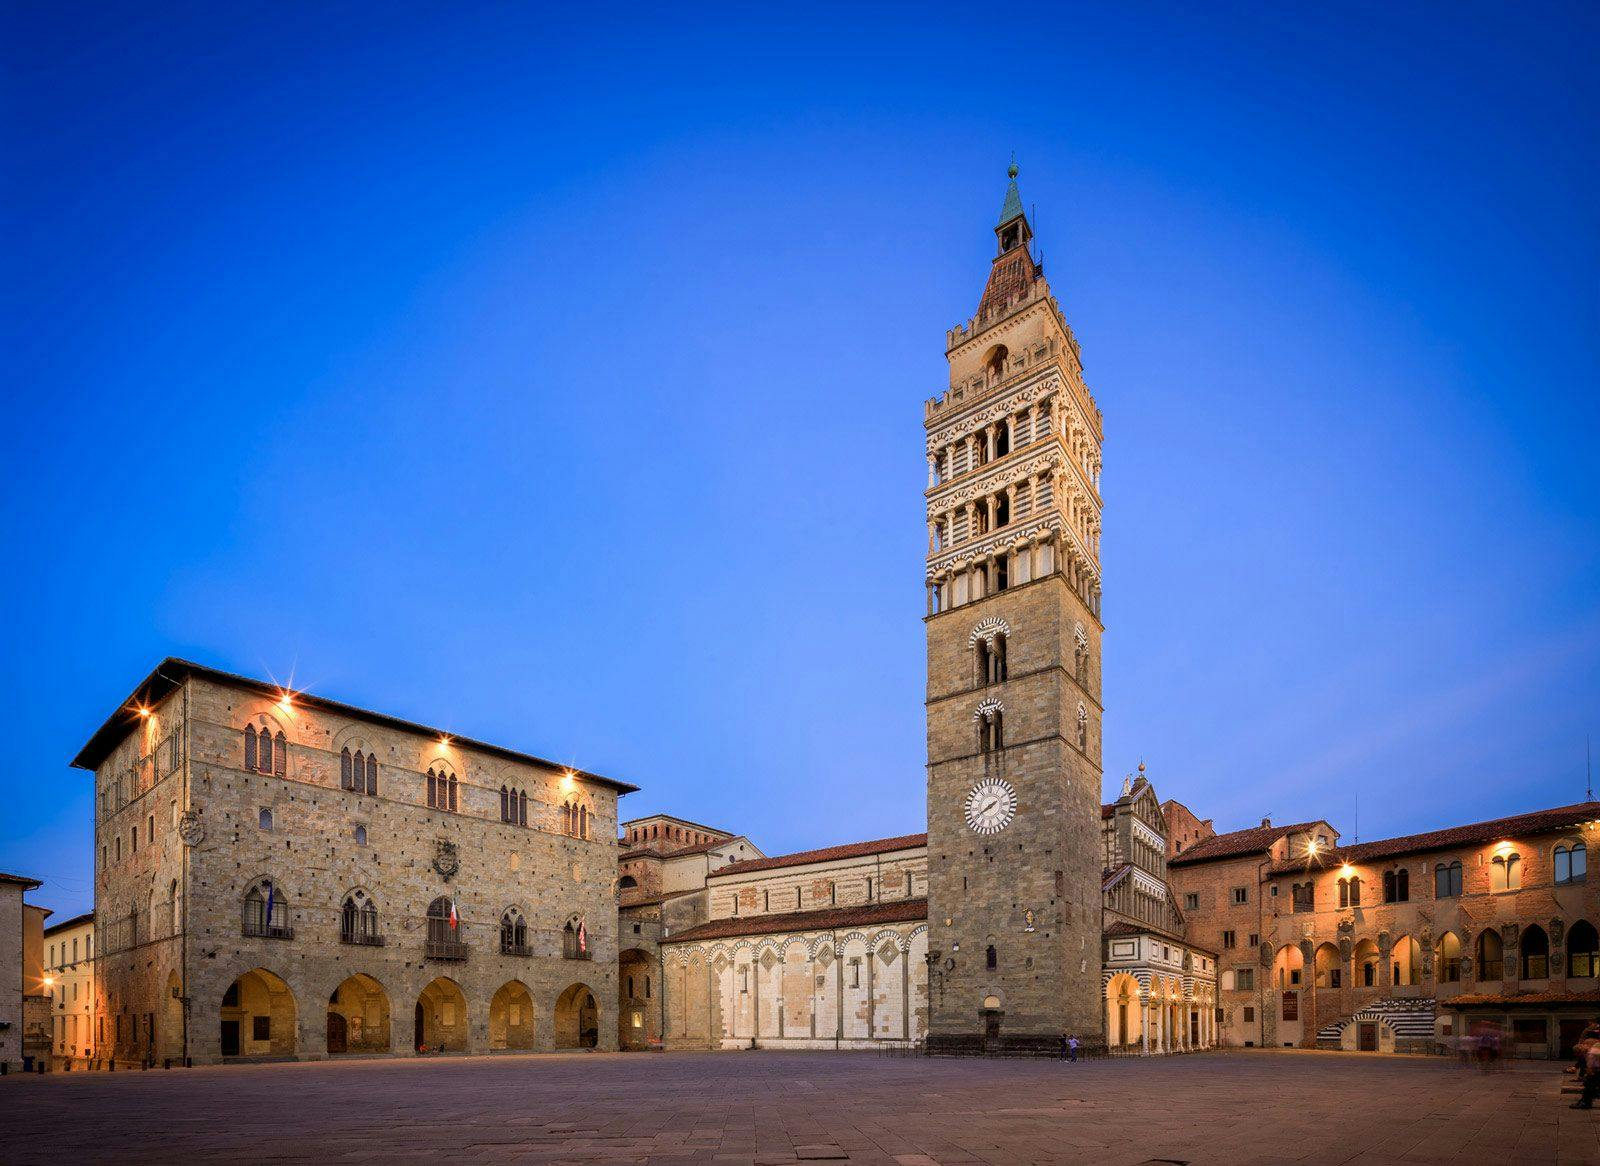 Pistoia town center with towers and town hall